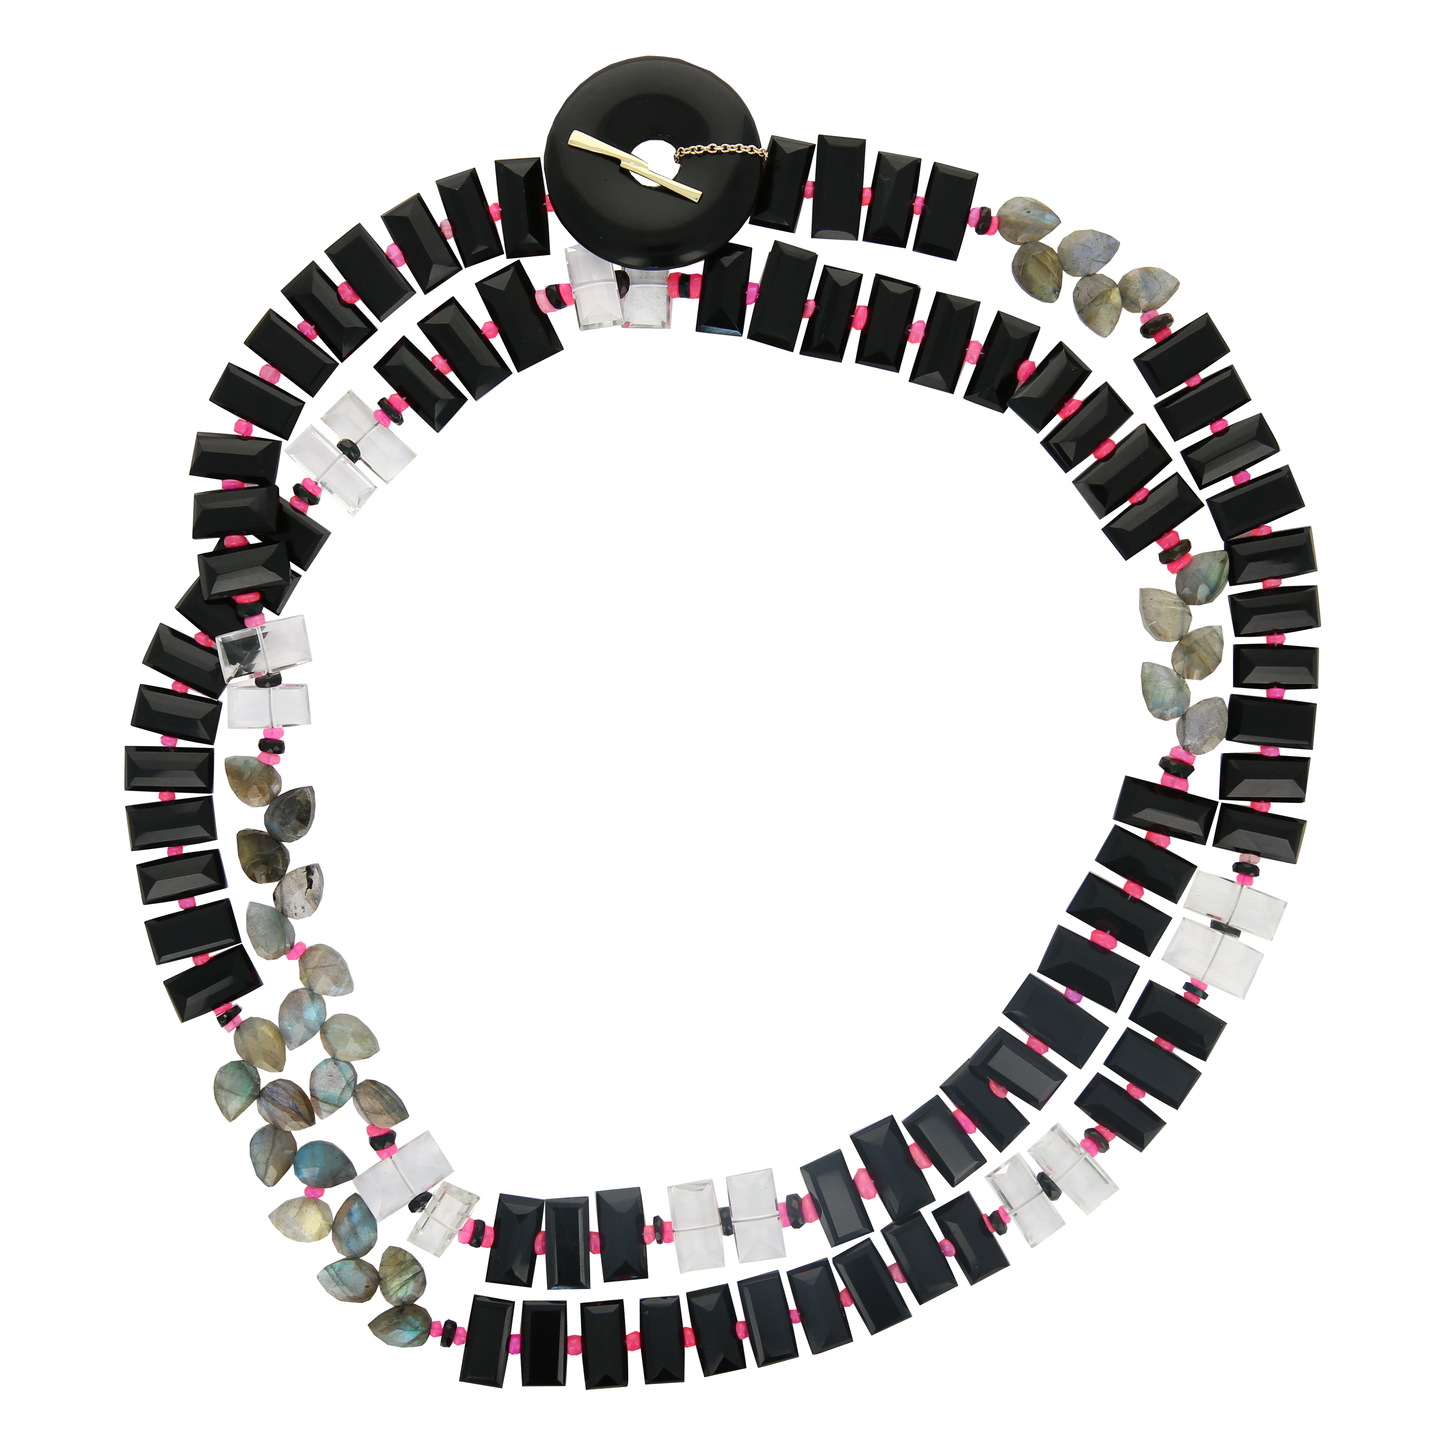 Black Onyx and Pink Opal Piano Key Necklace